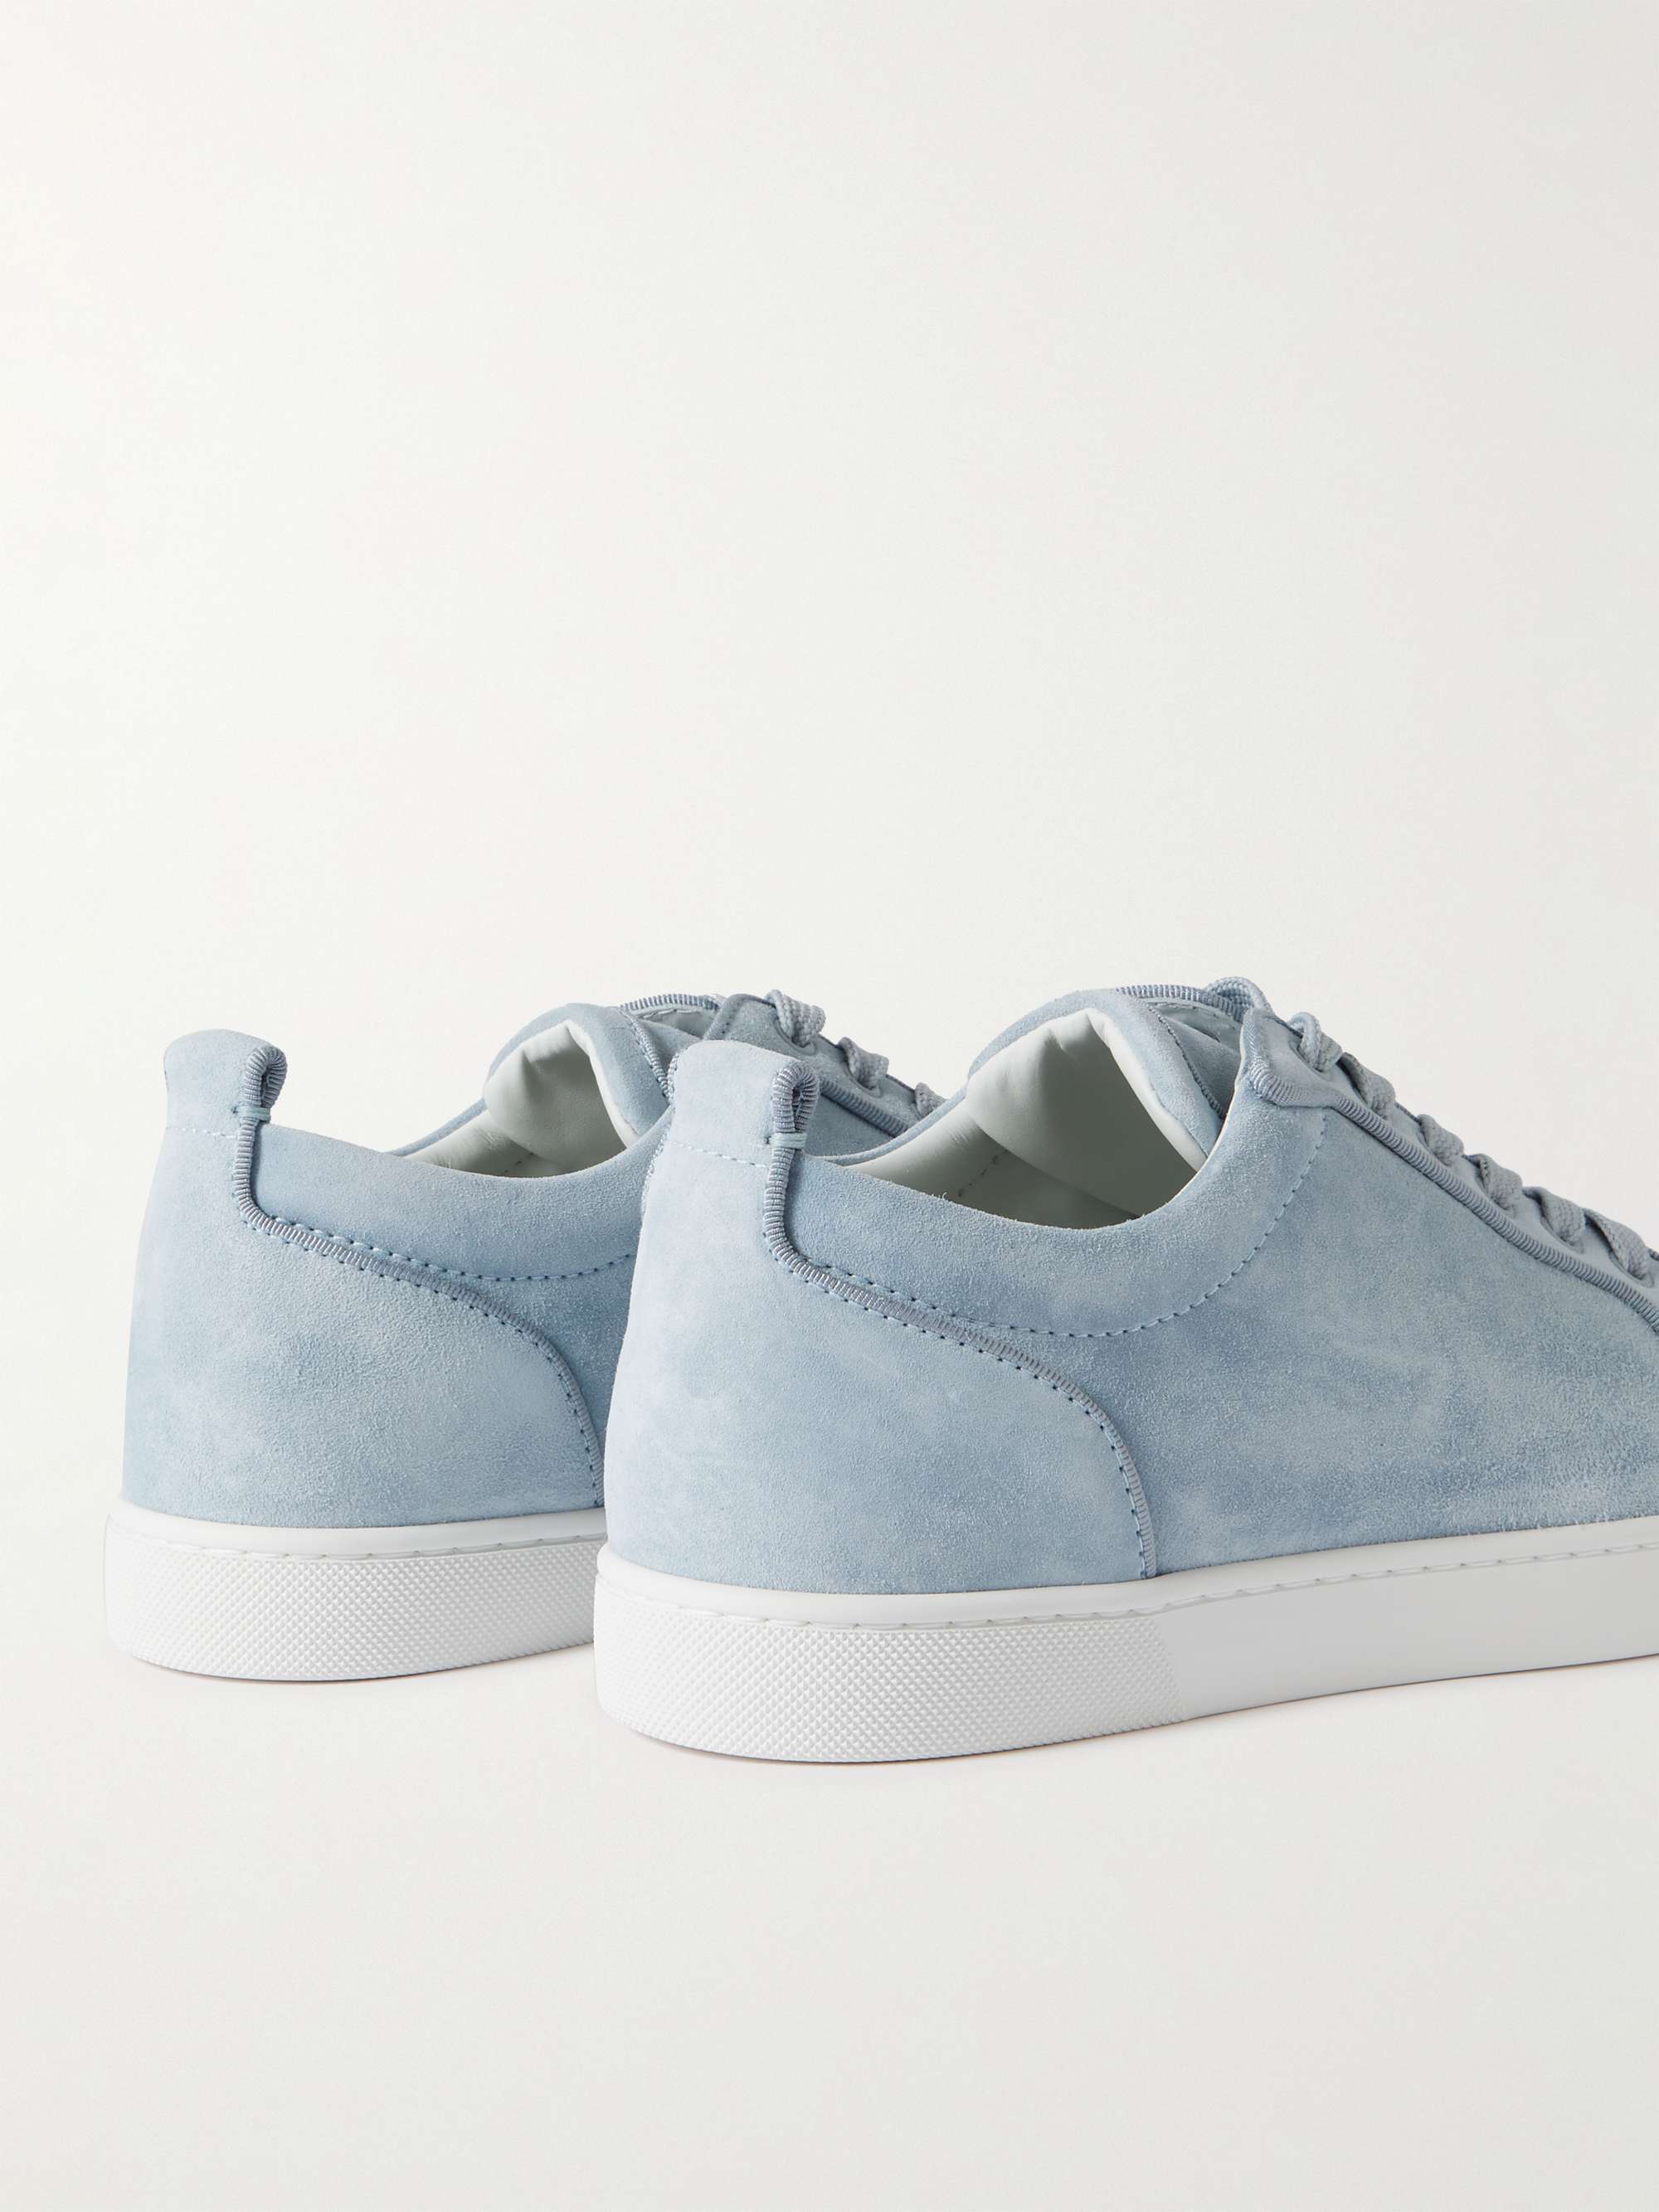 CHRISTIAN LOUBOUTIN Rantulow Suede Sneakers for Men | MR PORTER